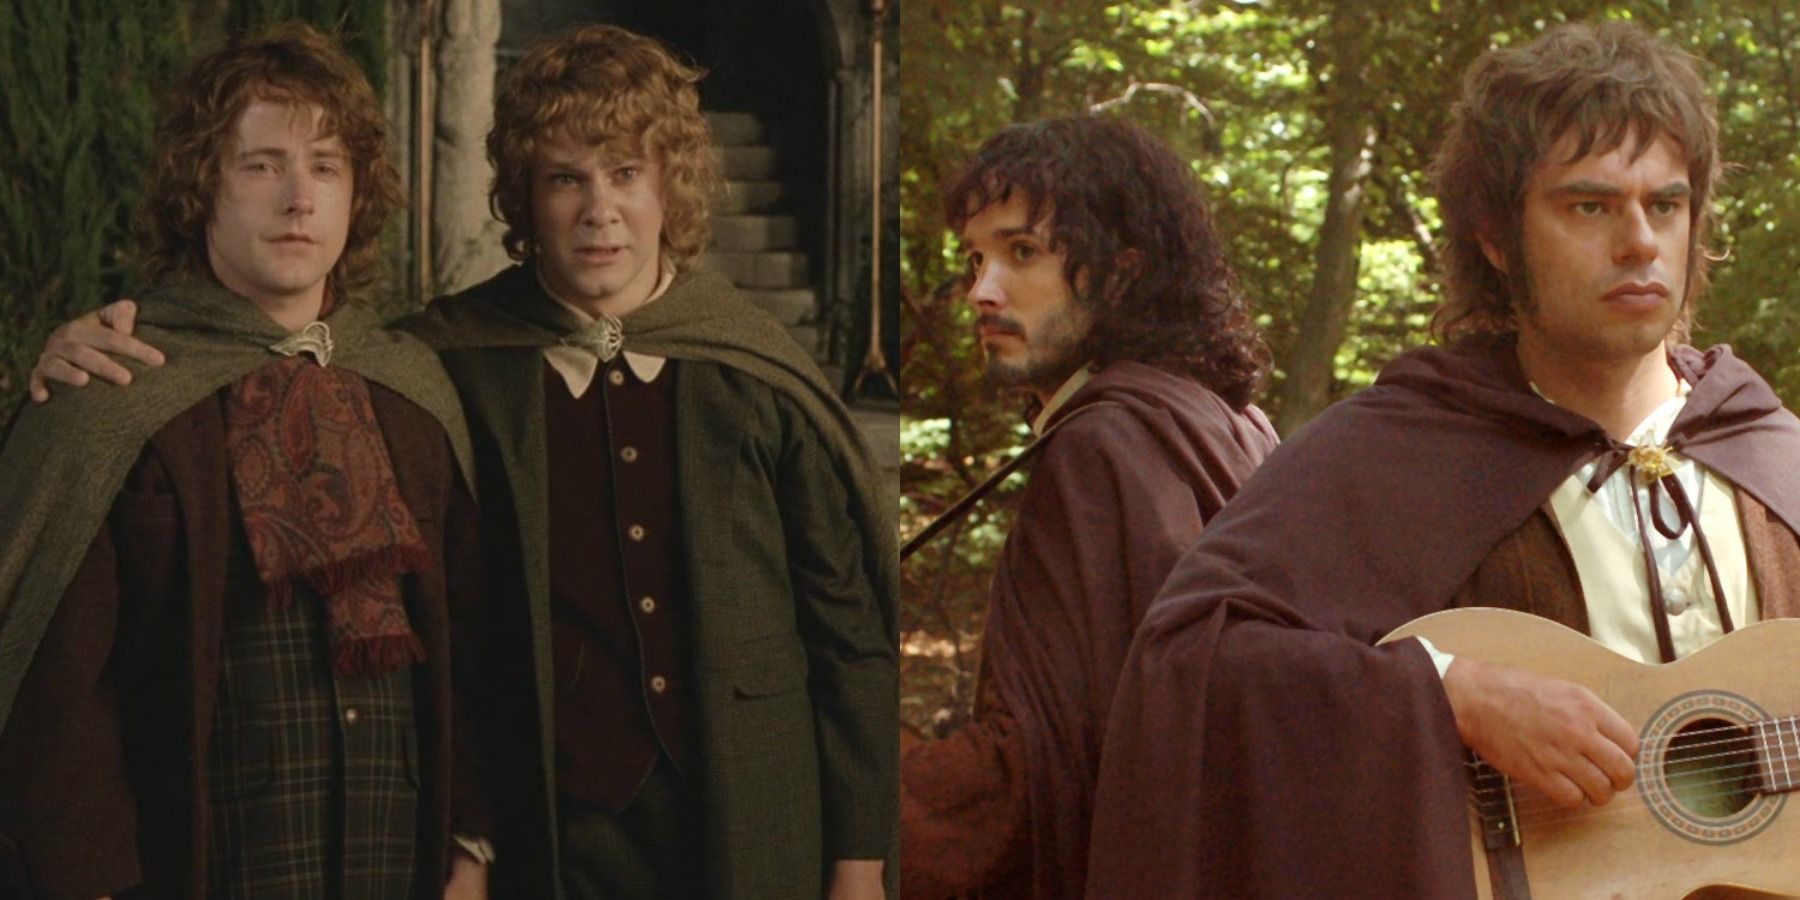 Merry and Pippin Flight of the Conchords Lord of the Rings